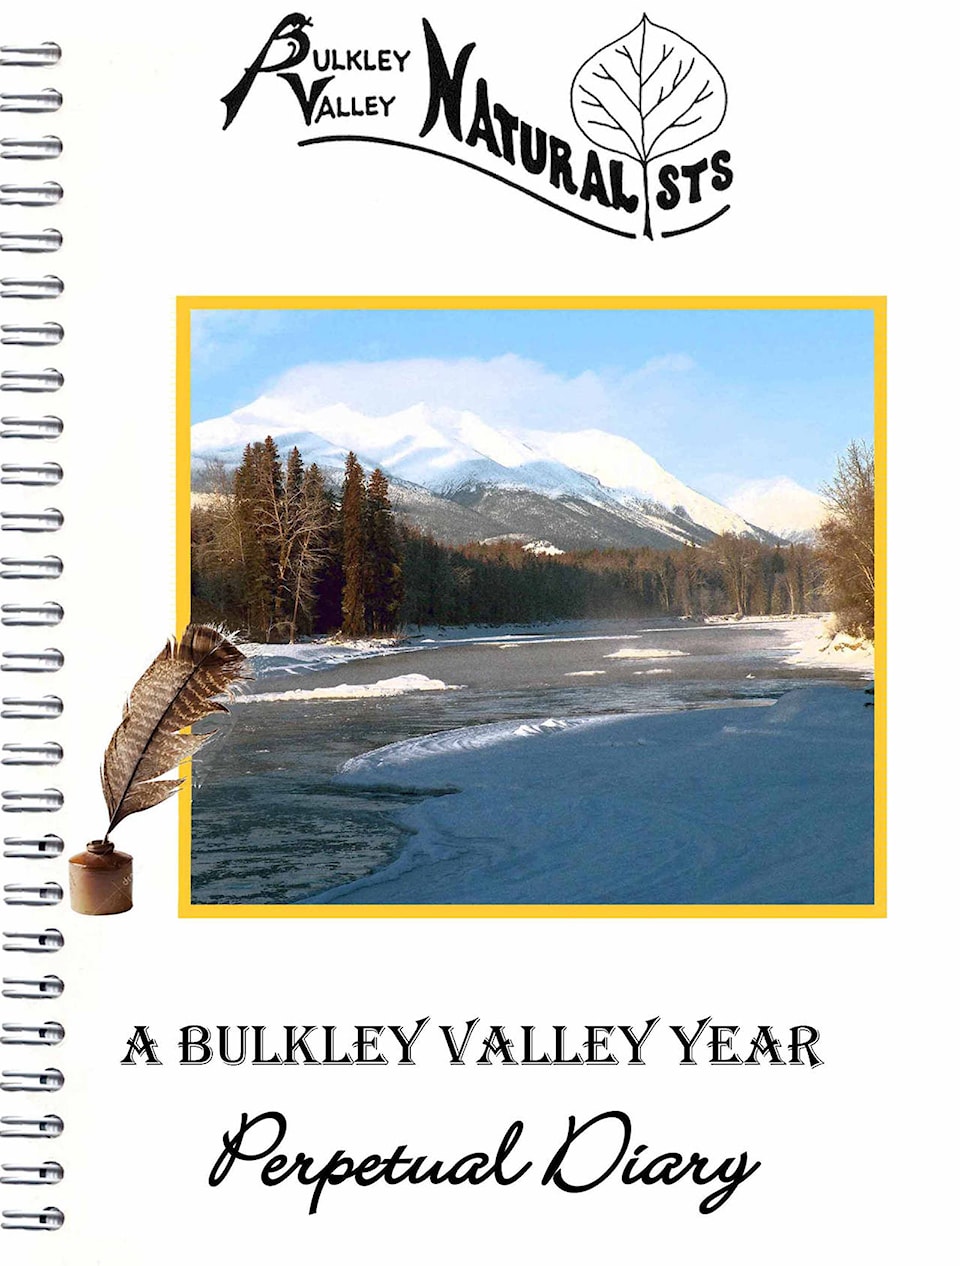 10073850_web1_Bulkley-Valley-Naturalists-nature-diary